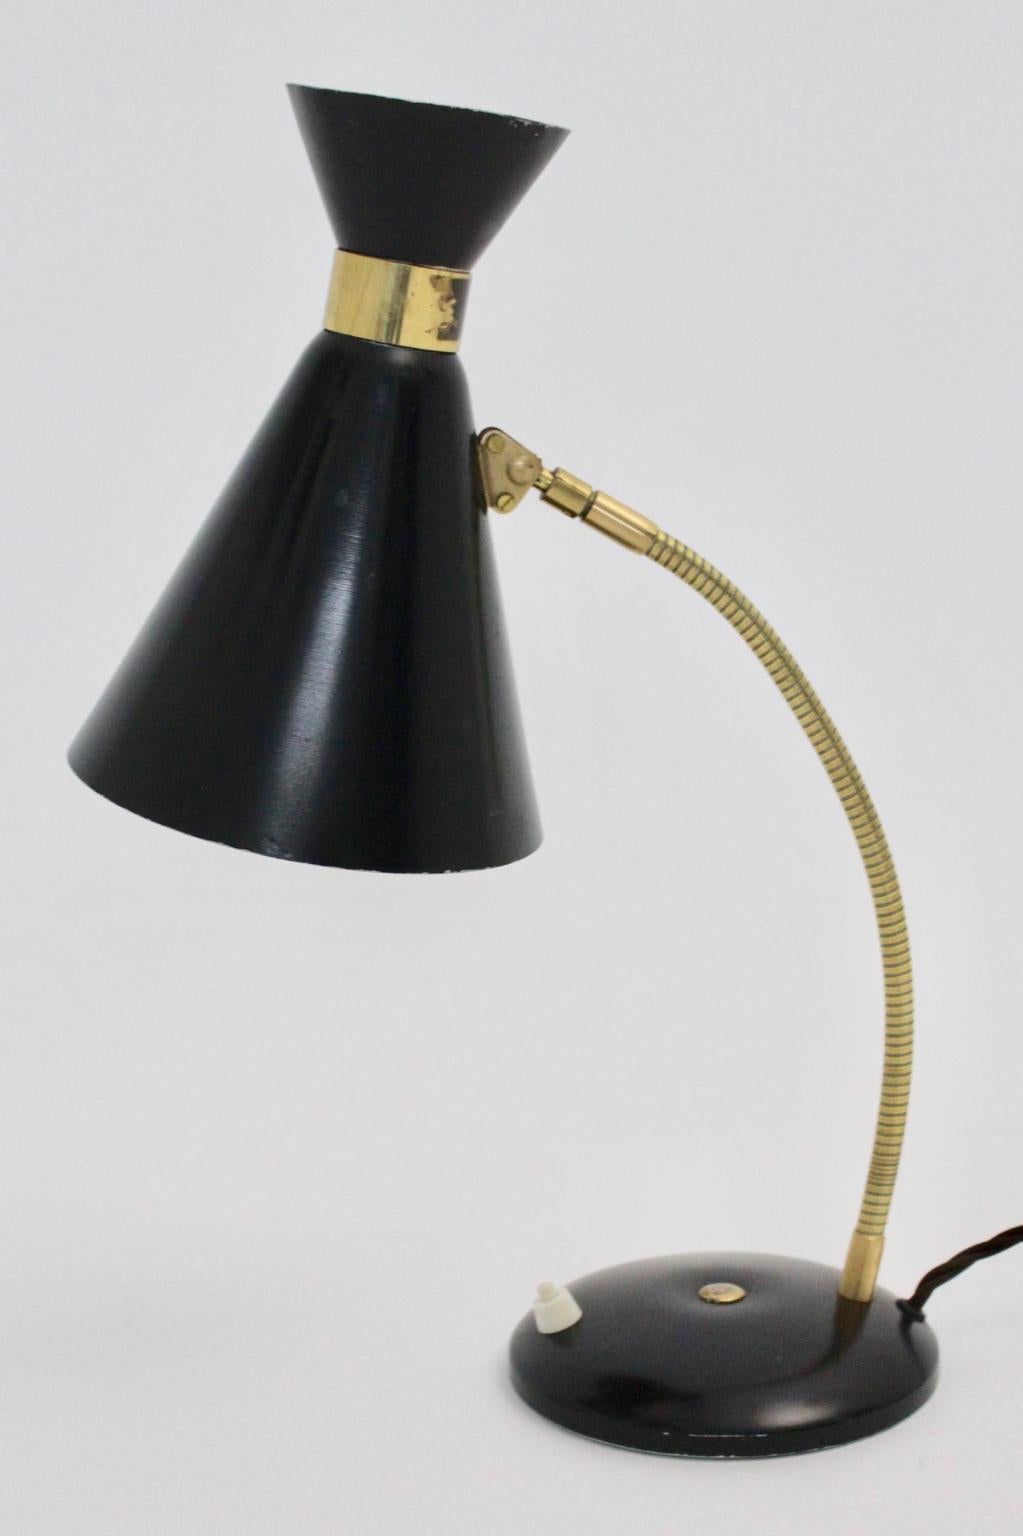 We present a charming brass and black table lamp by Stilnovo Italy 1950s.
The table lamp was made of black lacquered aluminum and a flexible stem with brass details. With the brass flexible stem the table lamp is easy to switch in each